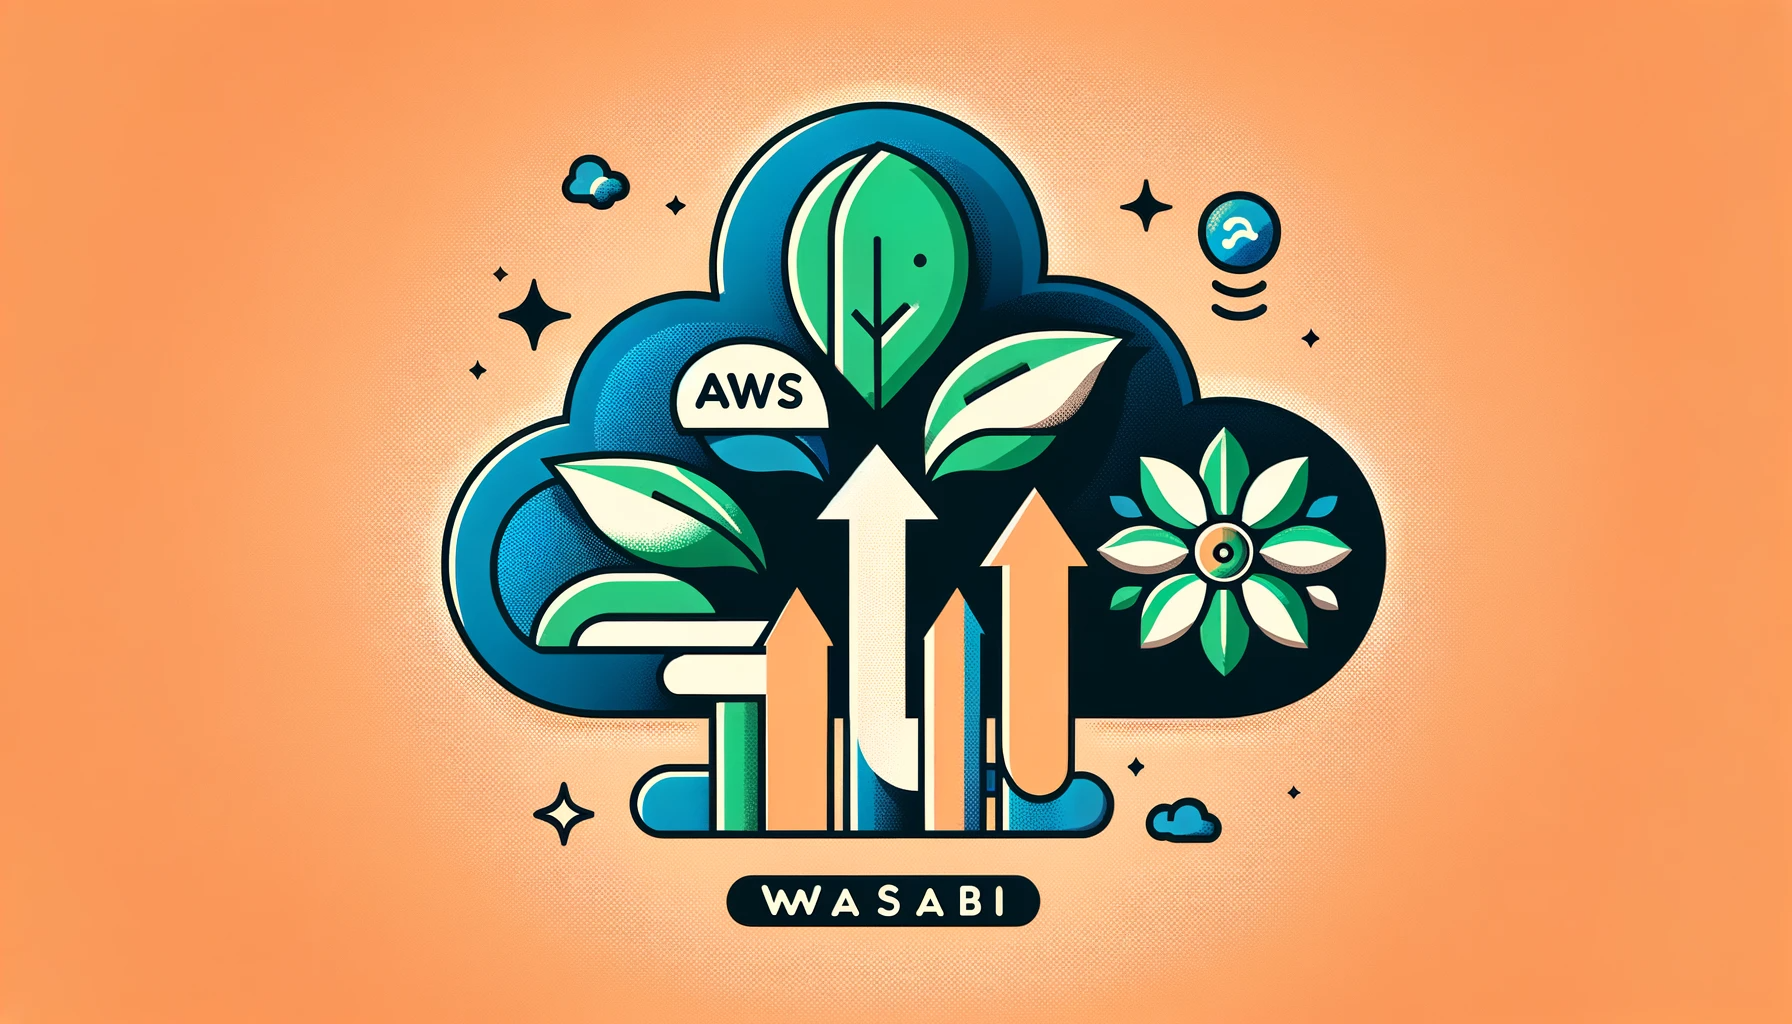 Wasabi, AWS’s competitor, enhances its cloud storage with Curio AI acquisition.